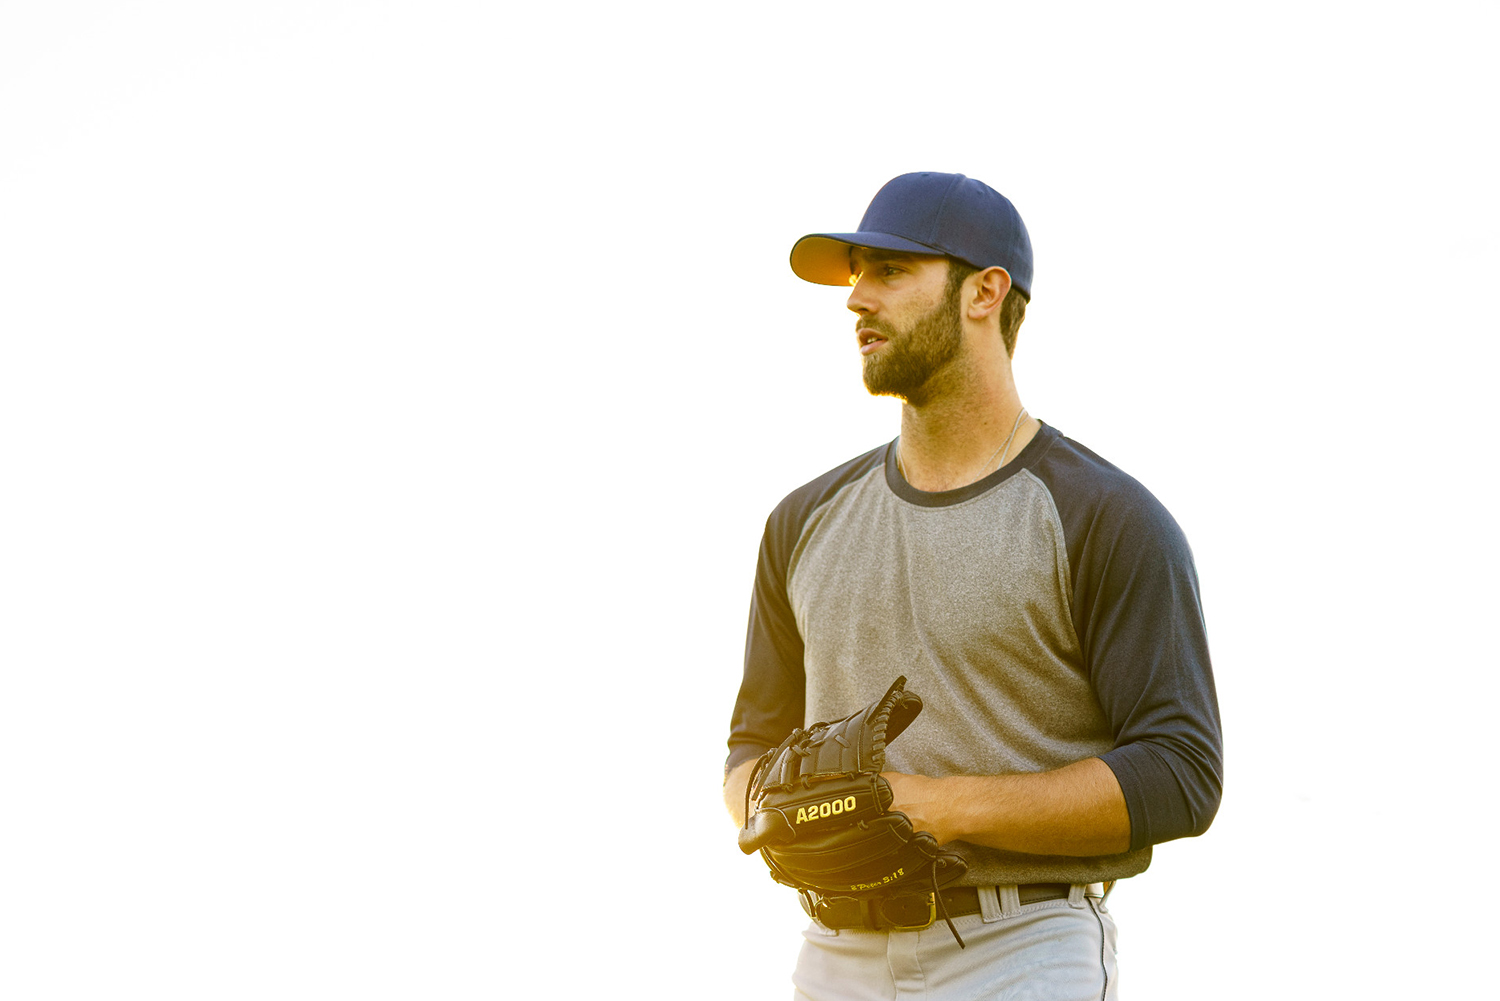 Former Milwaukee Brewers pitcher Daniel Norris fell in love with